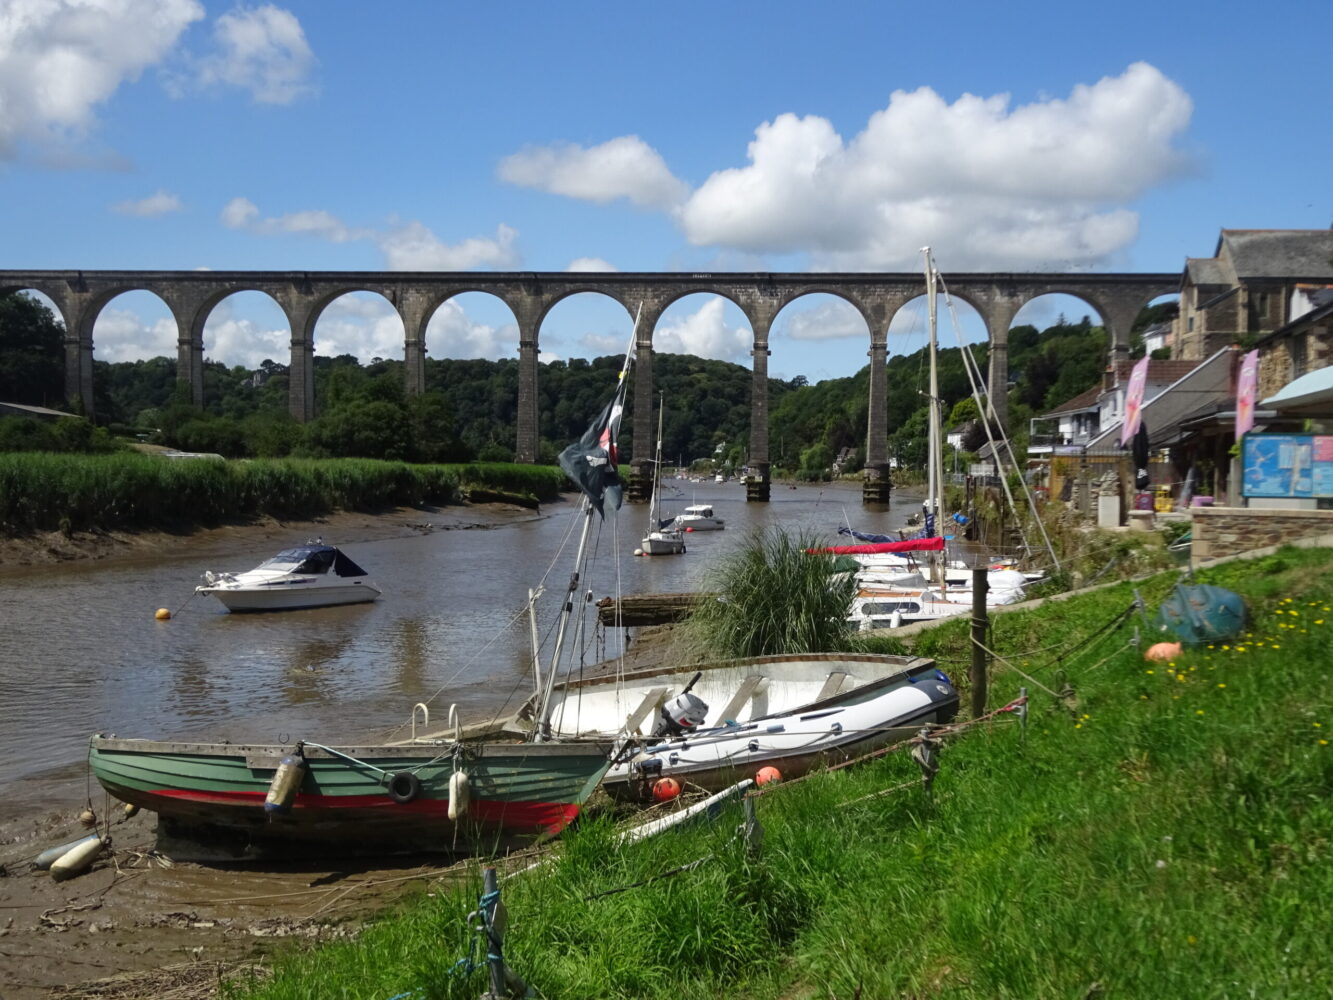 Calstock Viaduct from the quay